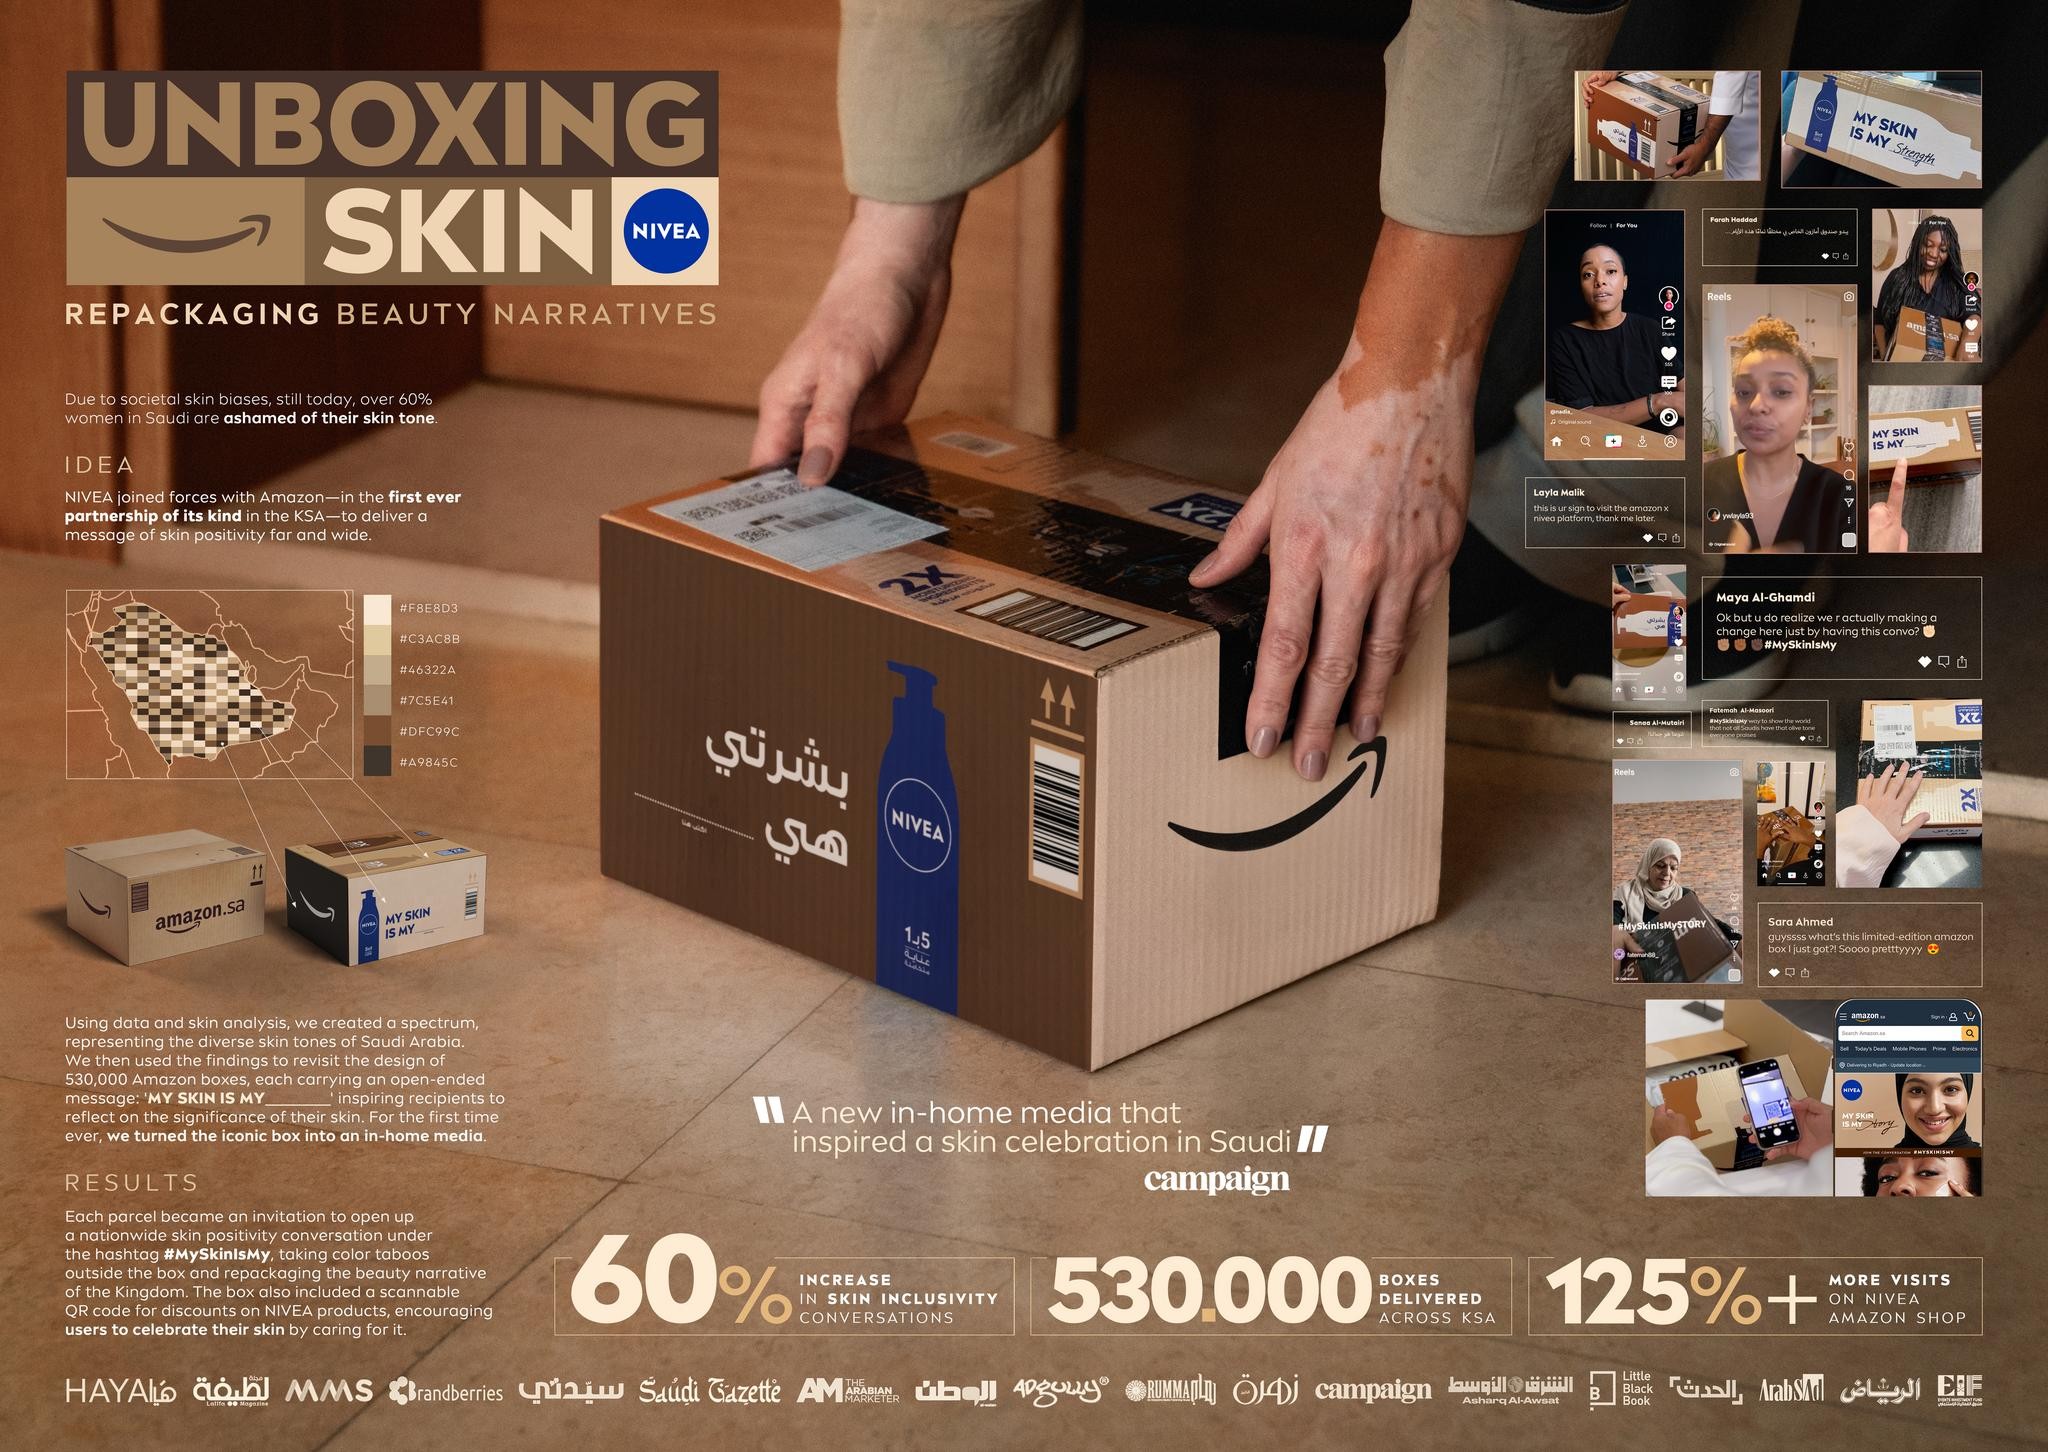 Unboxing Skin